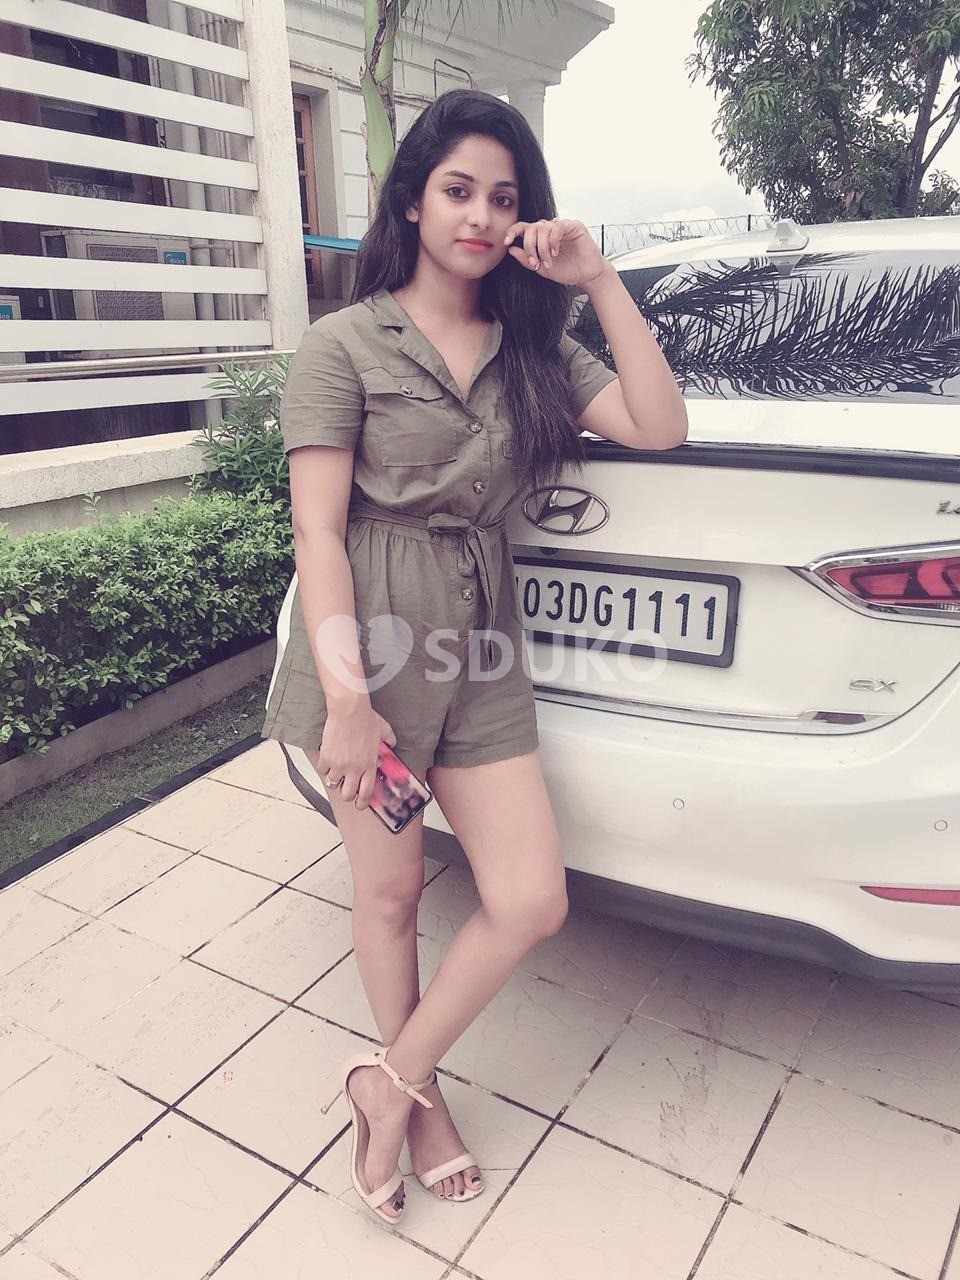 MY SELF KAVYA BEST Goregaon *****CALL GIRL ESCORTS SERVICE IN/OUT VIP INDEPENDENT CALL GIRLS SERVICE ALL SEX ALLOW BOOK